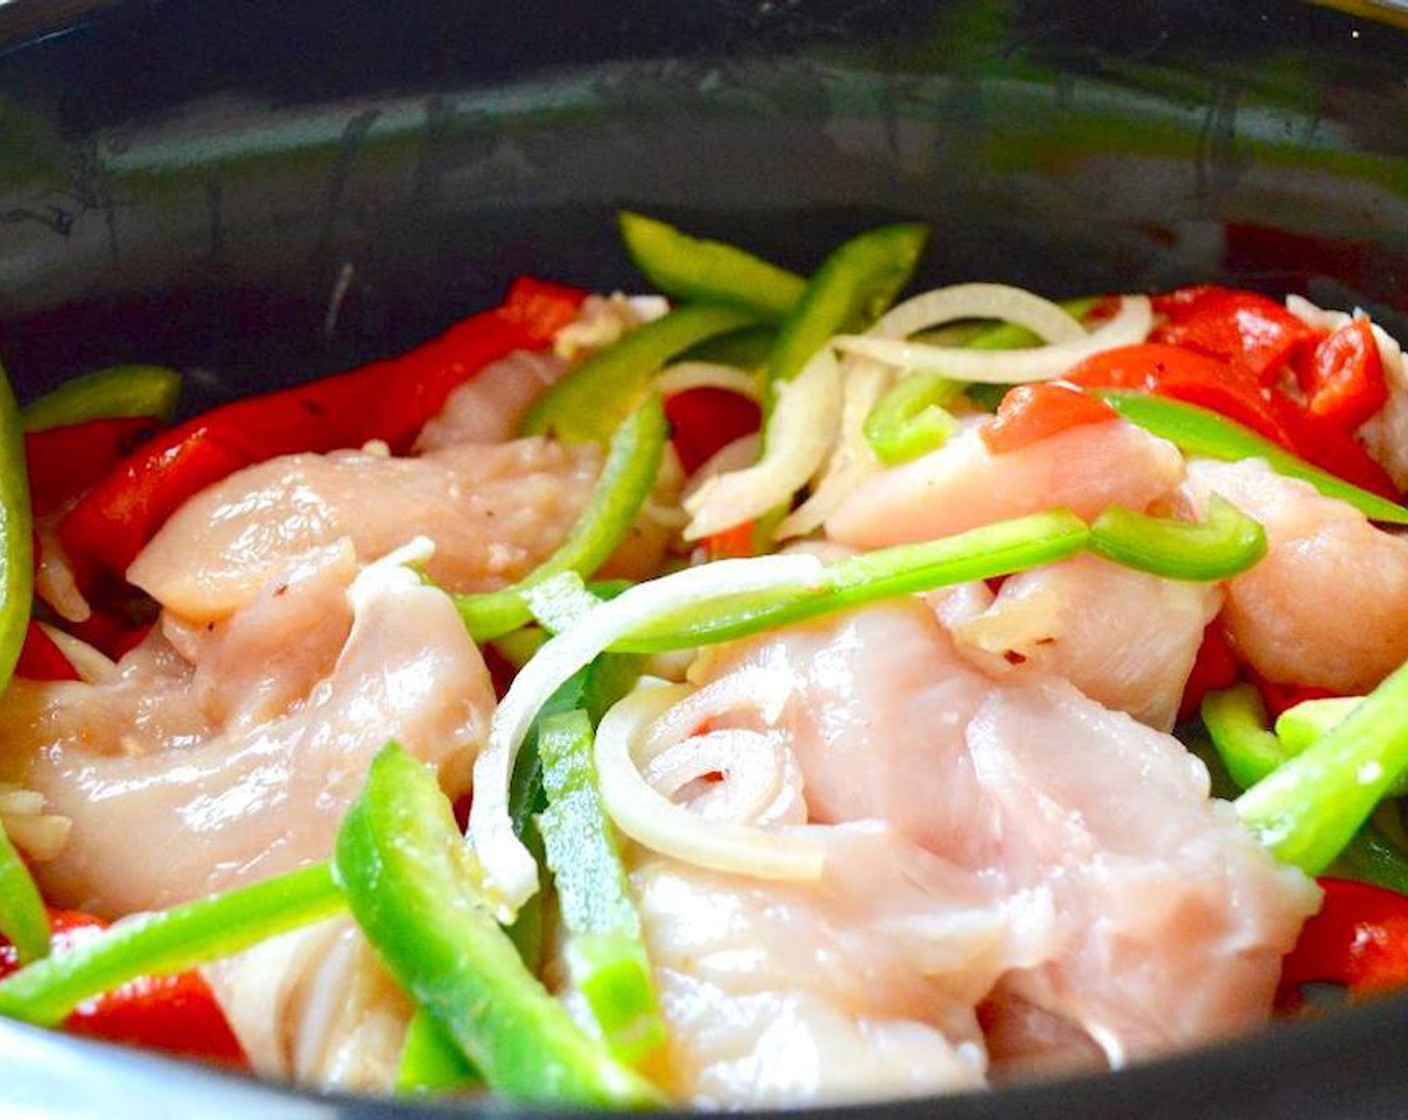 step 1 Combine the Chicken Tenders (2 lb), Jarred Roasted Red Peppers (2 jars), Green Bell Peppers (2), Onions (2), Garlic (3 cloves), Worcestershire Sauce (1/2 tsp), {@11:}, Chicken Stock (1/2 cup), Ground Cumin (1/2 tsp), Paprika (1/2 tsp), {@10:}, and Crushed Red Pepper Flakes (1/2 tsp) in a large slow cooker.